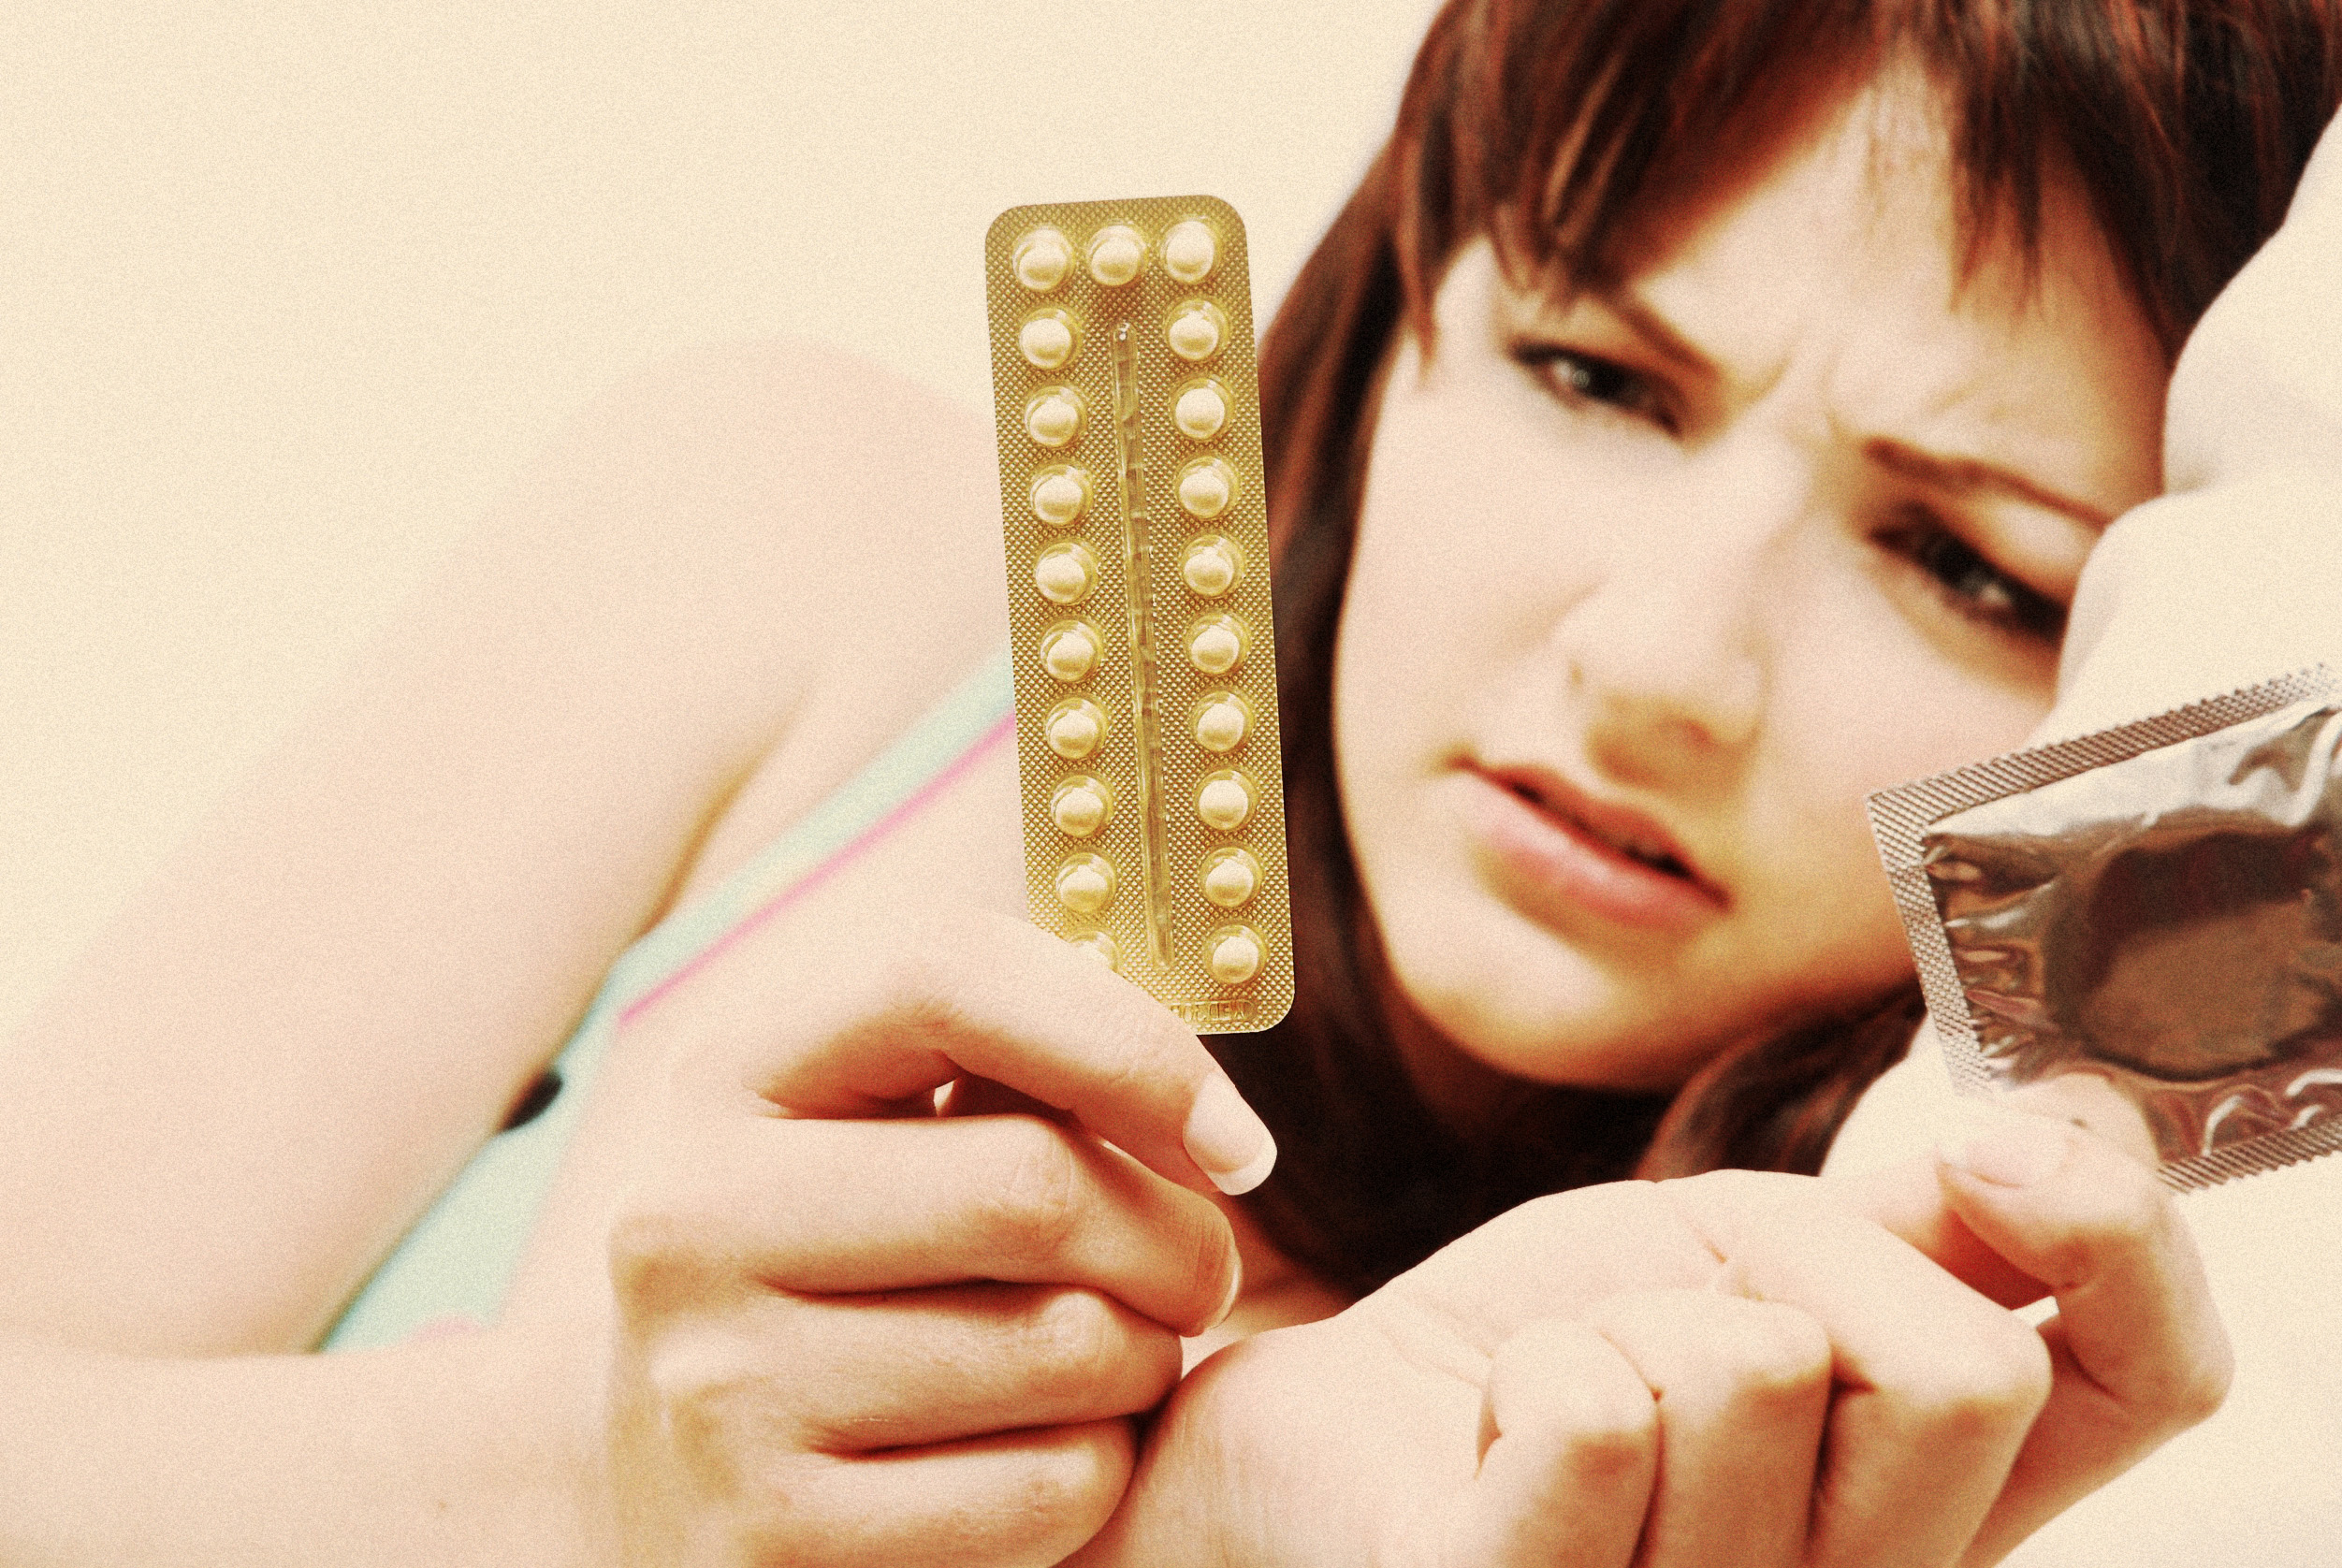 A young girl is trying to decide between The Pill and a condom